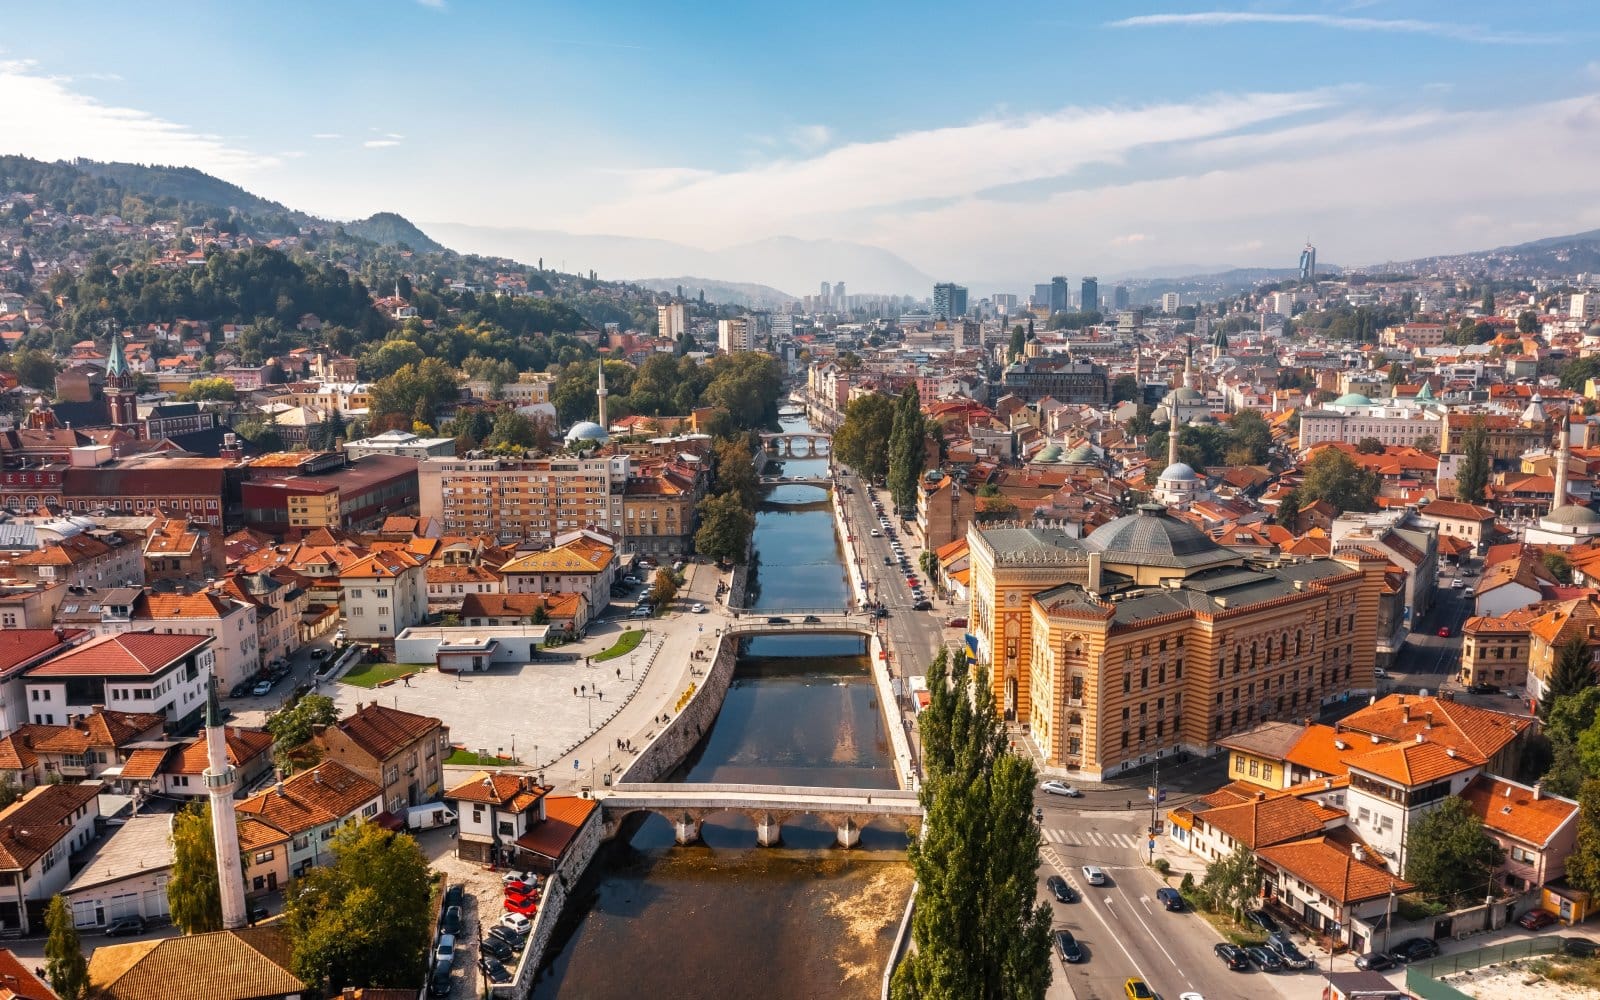 <p class="wp-caption-text">Image Credit: Shutterstock / Aleksandr Medvedkov</p>  <p>Sarajevo is an affordable, off-the-beaten-path destination with a rich history, welcoming locals, and hearty Bosnian cuisine at low prices.</p>